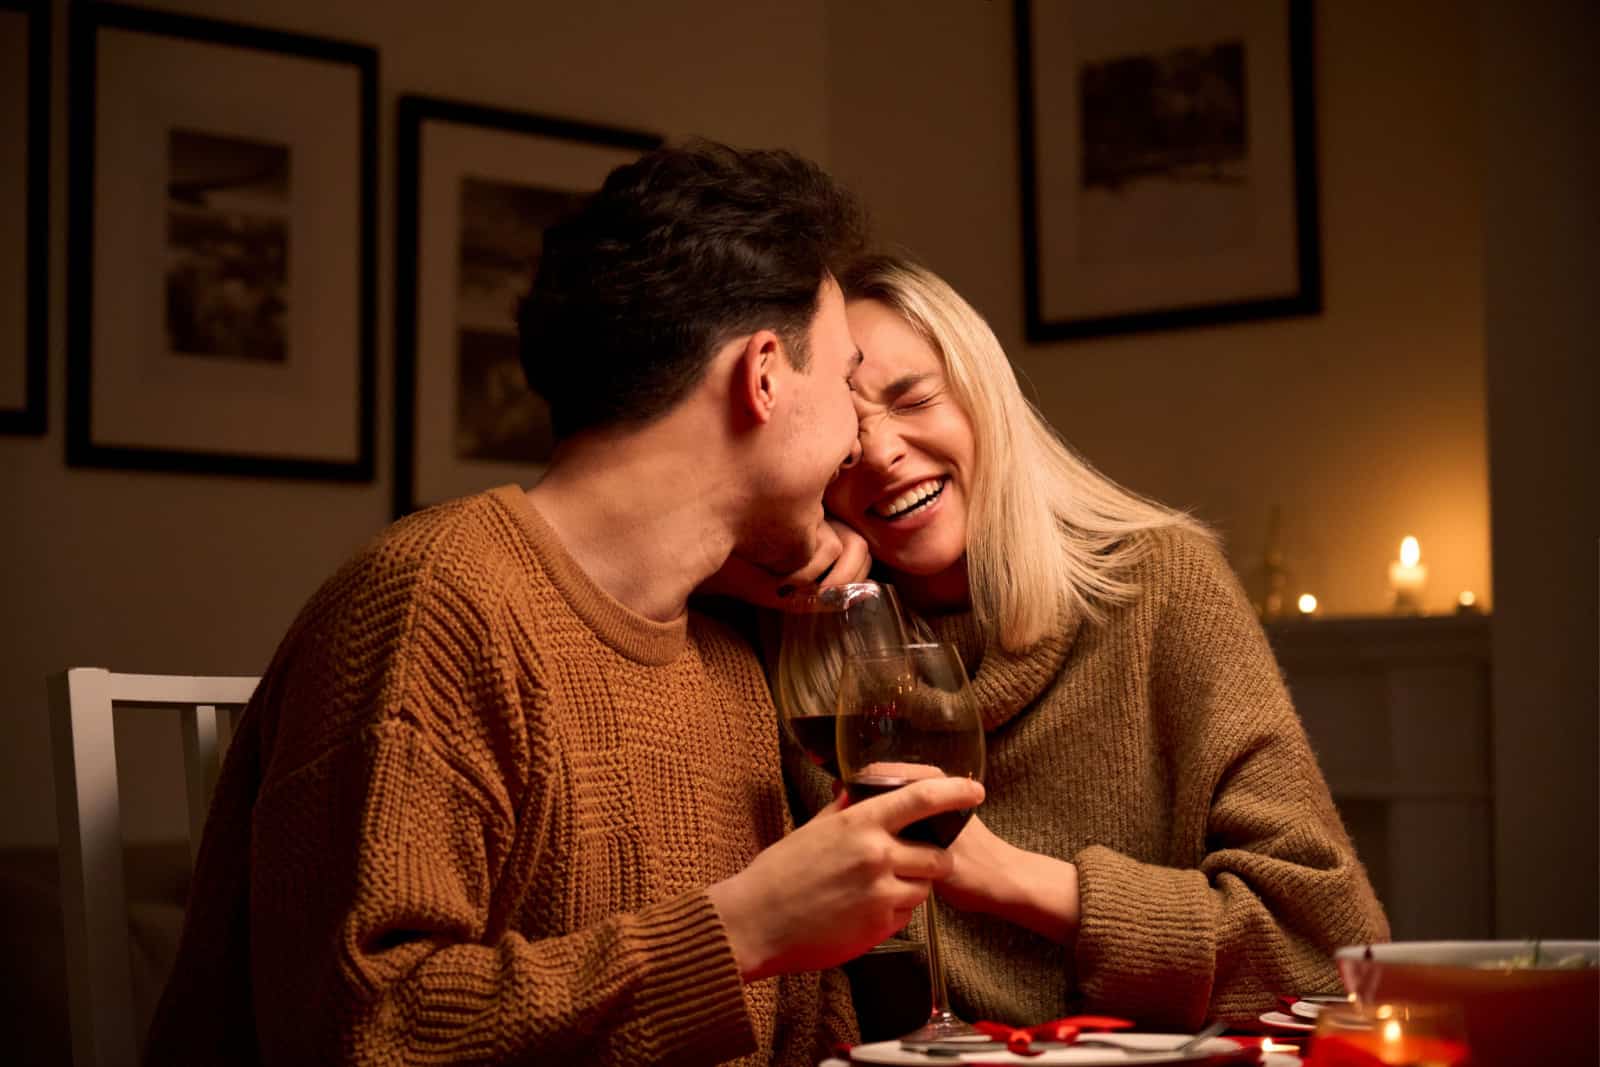 couple laughing together during dinner